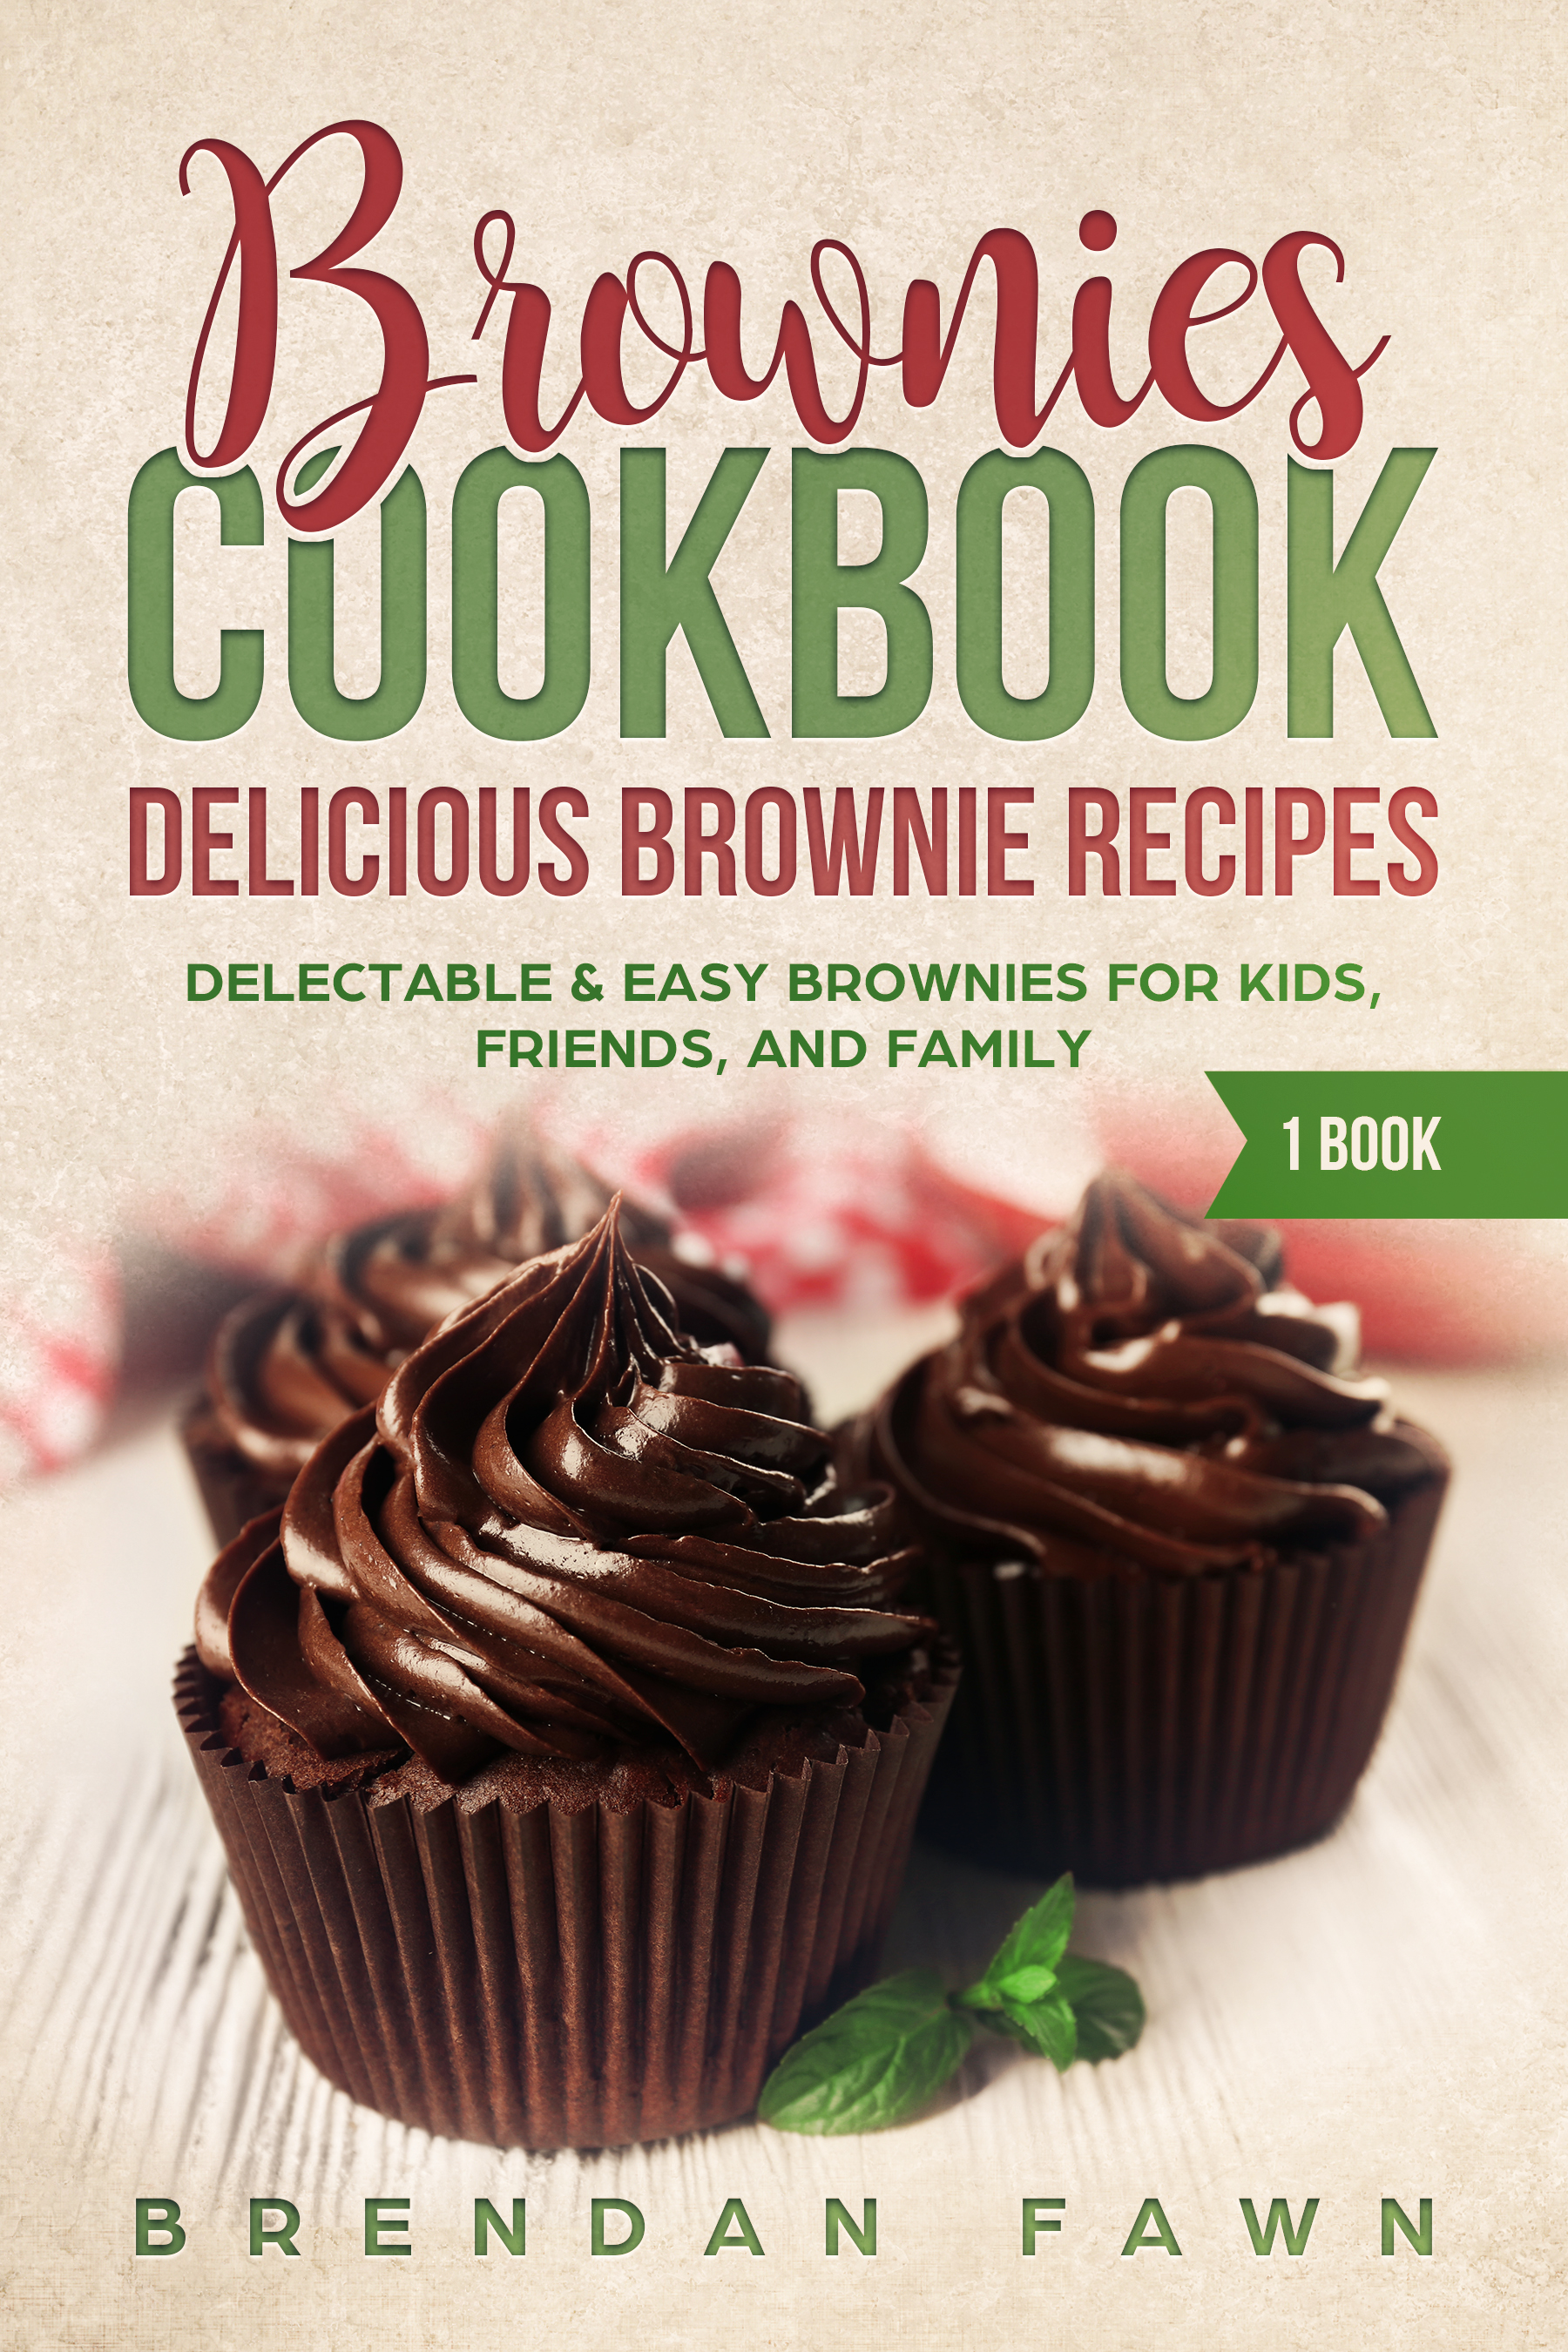 FREE: Brownies Cookbook: Delicious Brownie Recipes: Delectable & Easy Brownies for Kids, Friends, and Family by Brendan Fawn